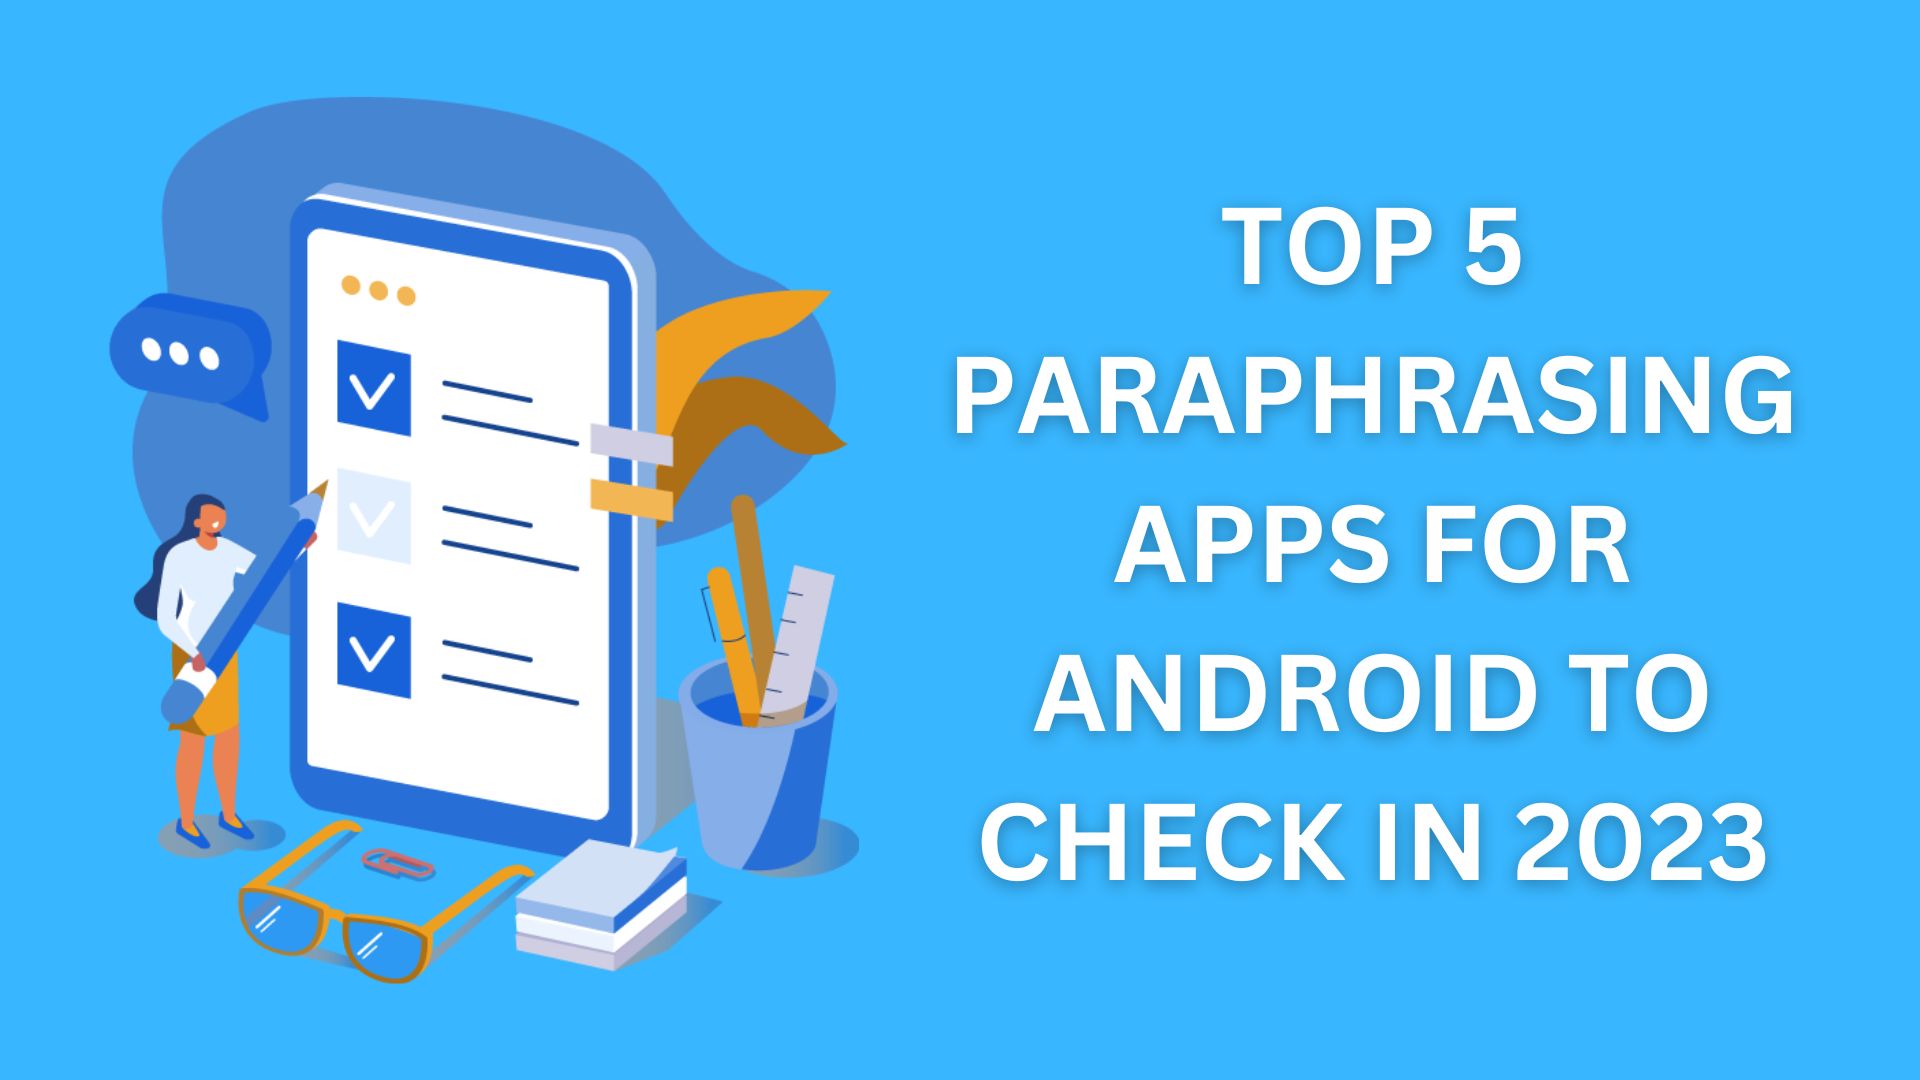 Top 5 Paraphrasing Apps For Android To Check In 2023